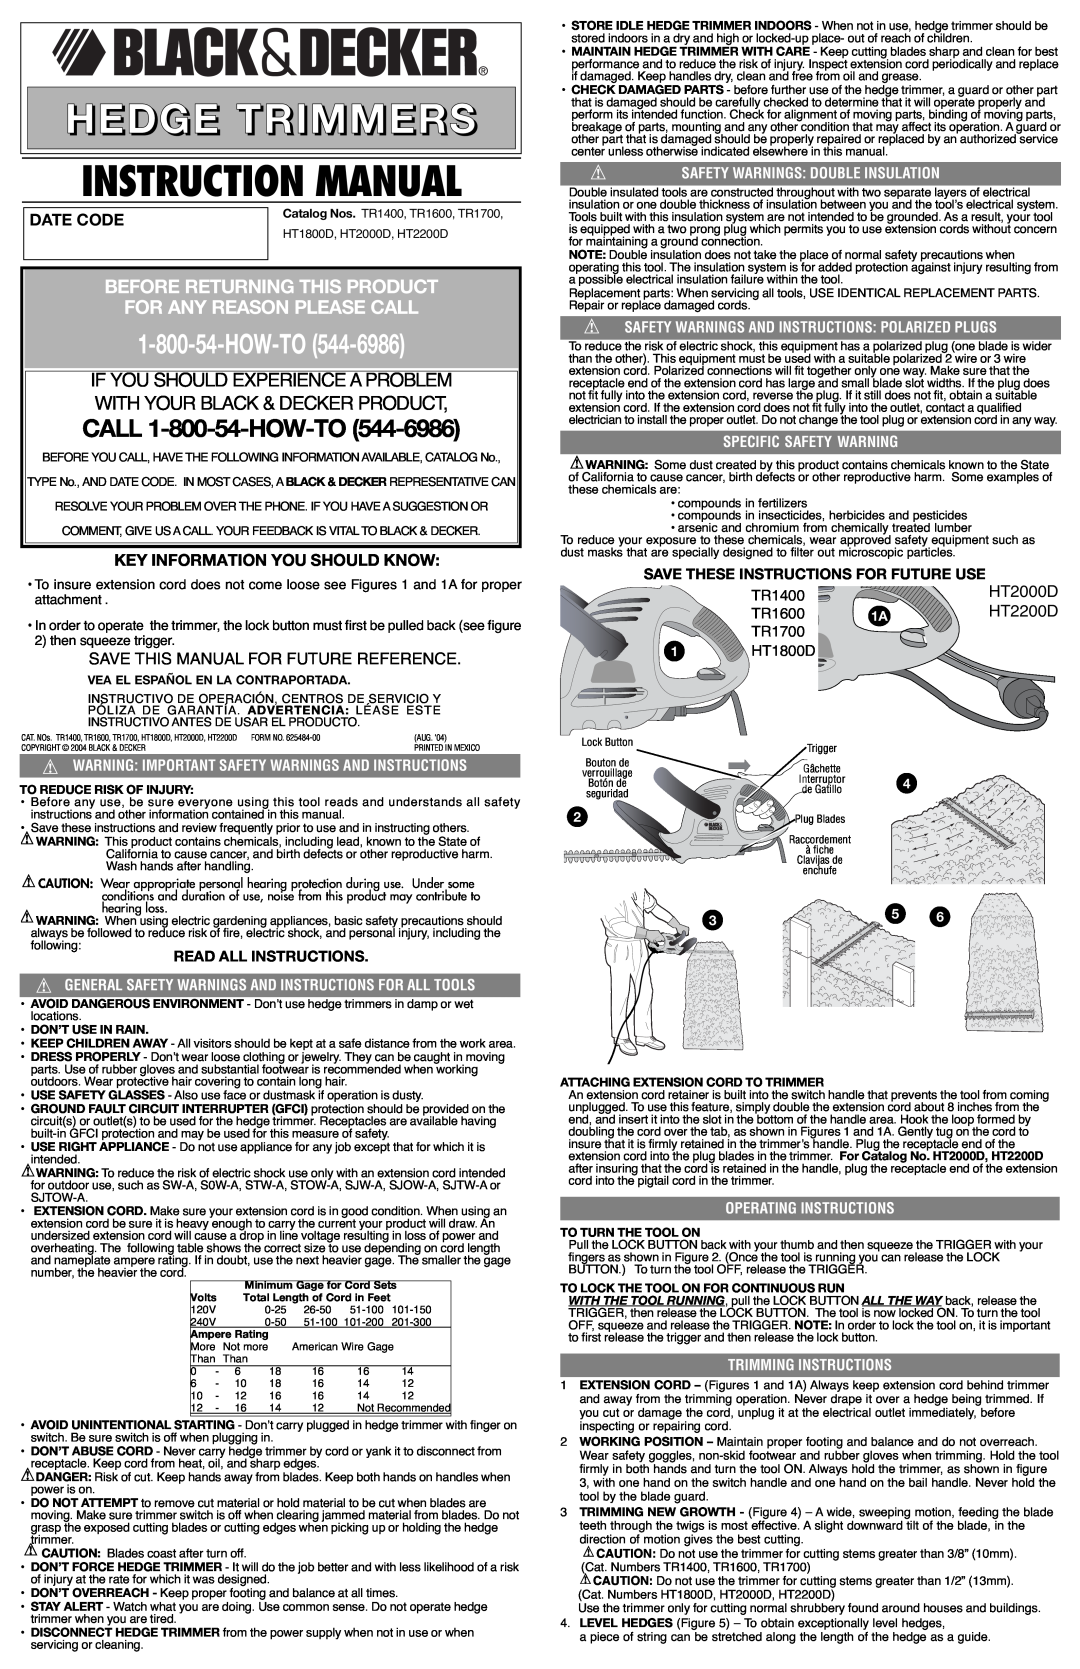 Black & Decker HT2000D instruction manual Date Code, Key Information You Should Know, HT2200D, Read All Instructions 